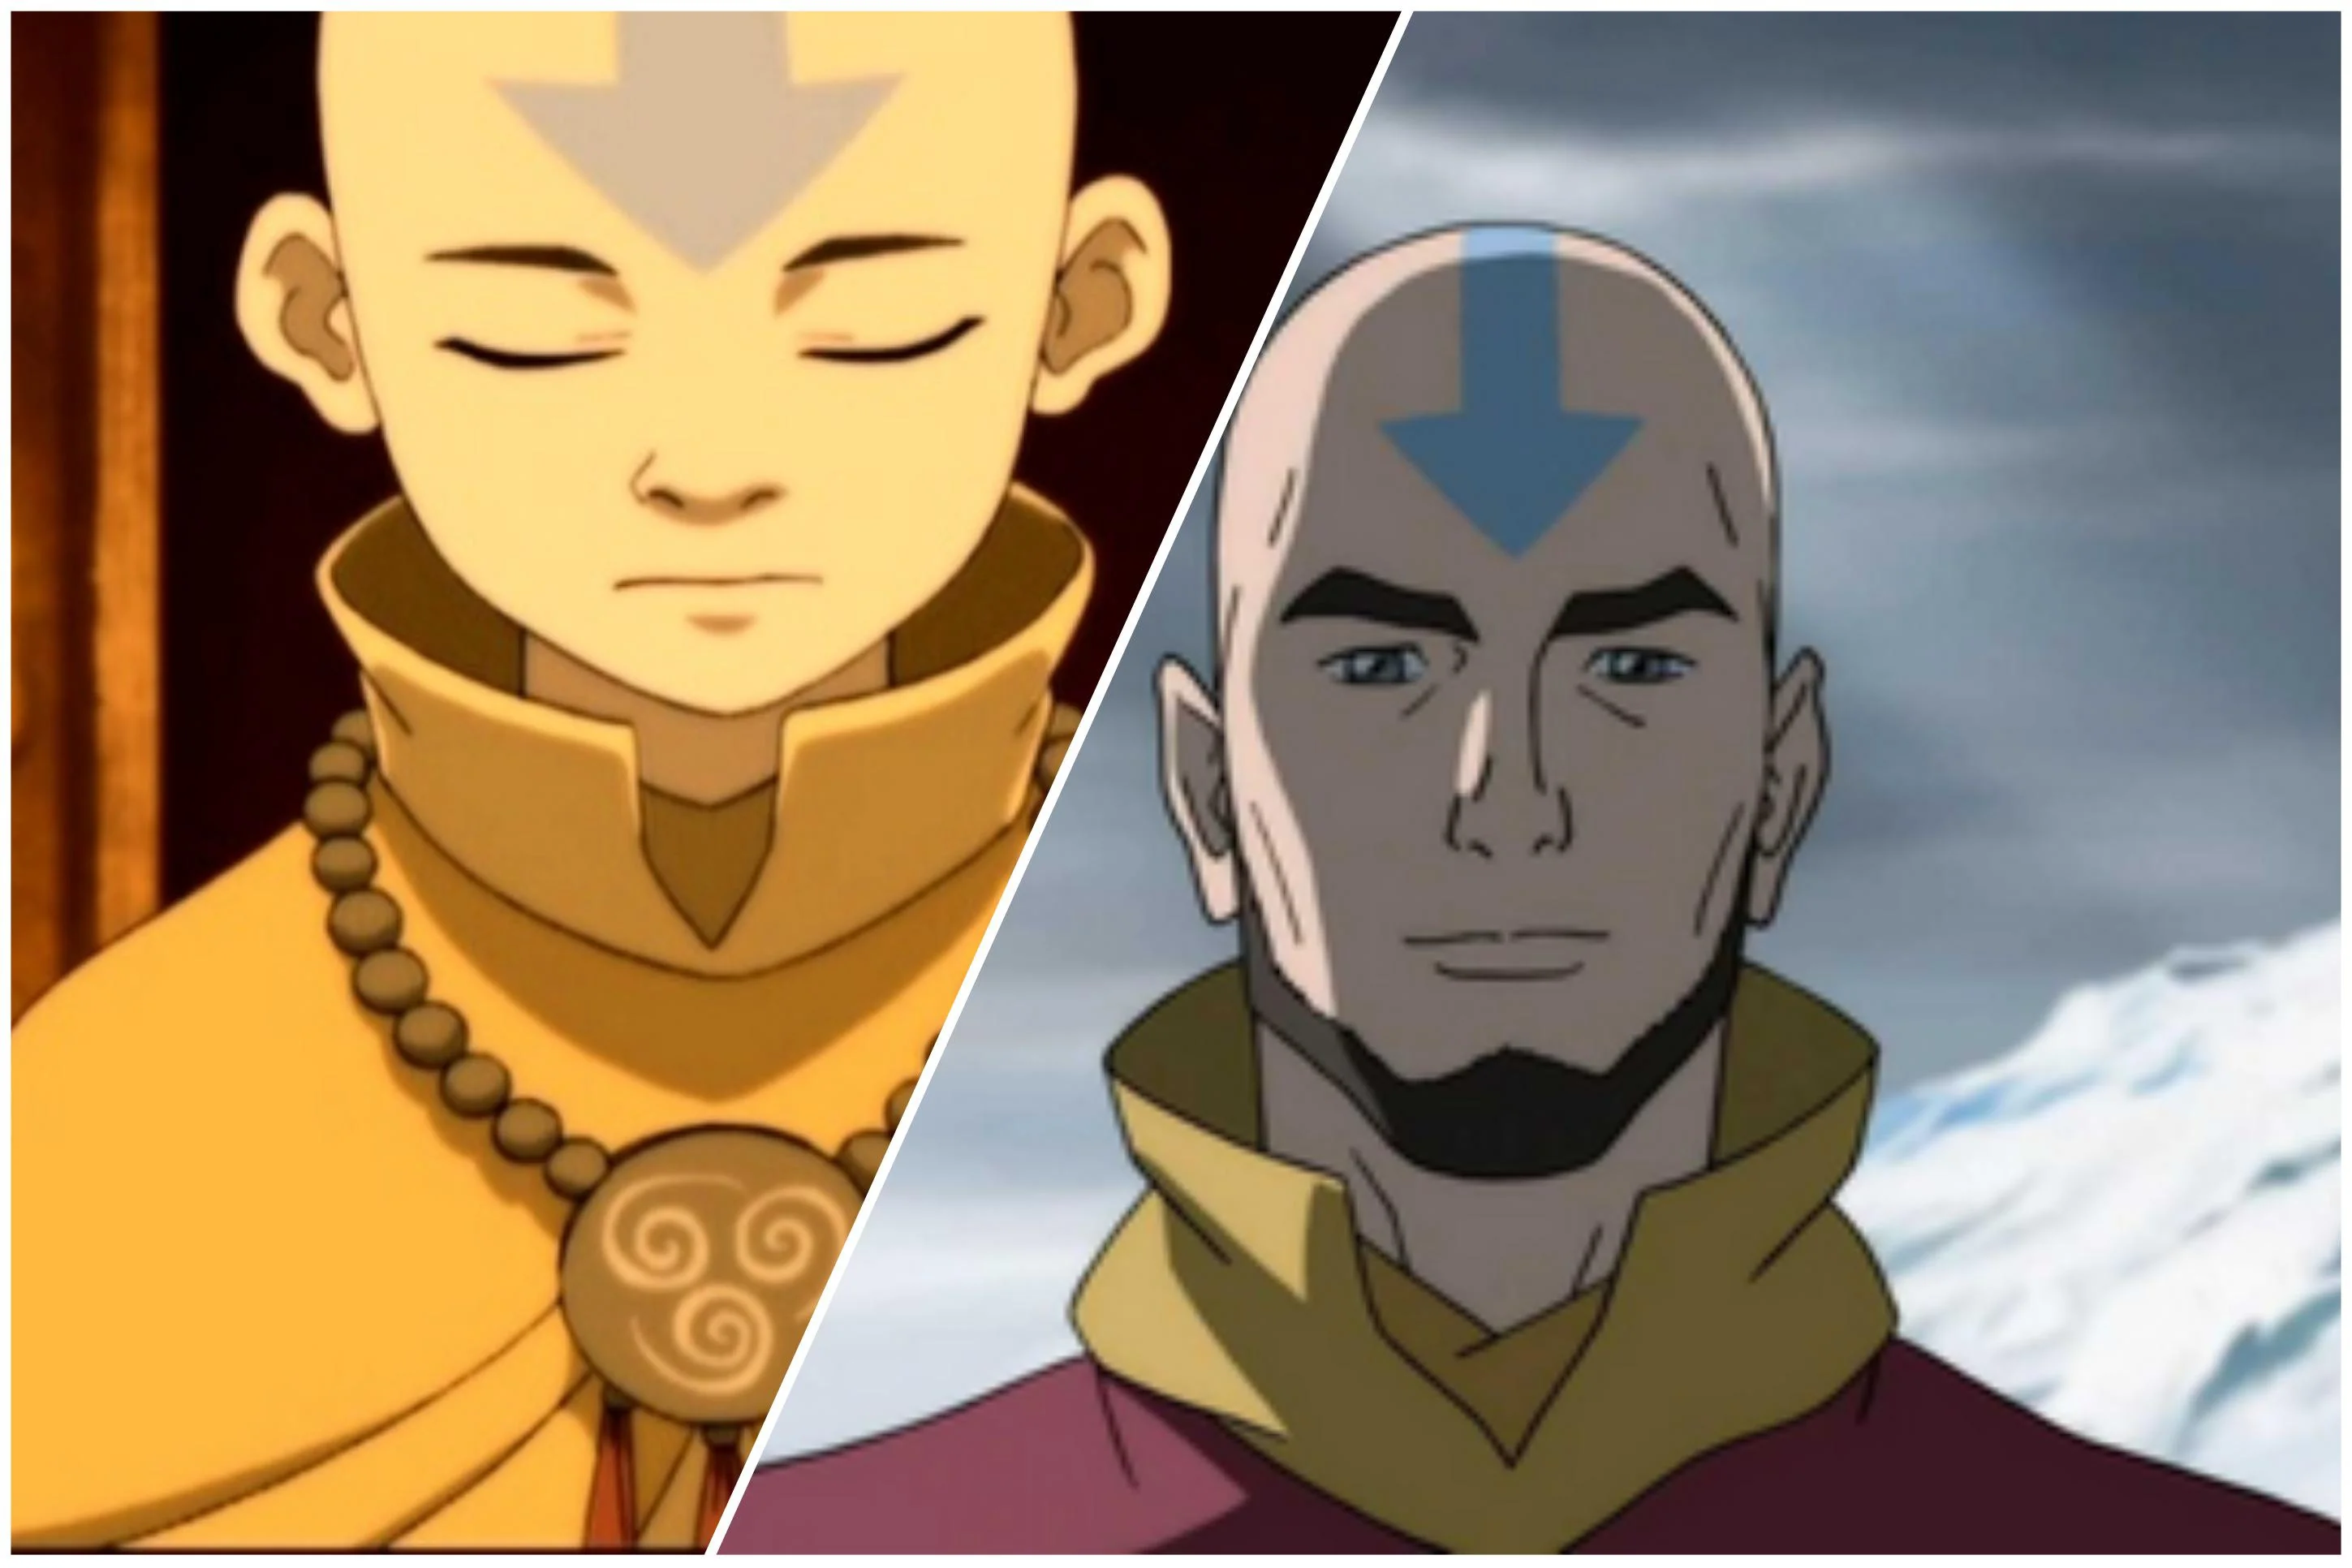 Aang's Journey: From Playful Air Nomad to Masterful Avatar